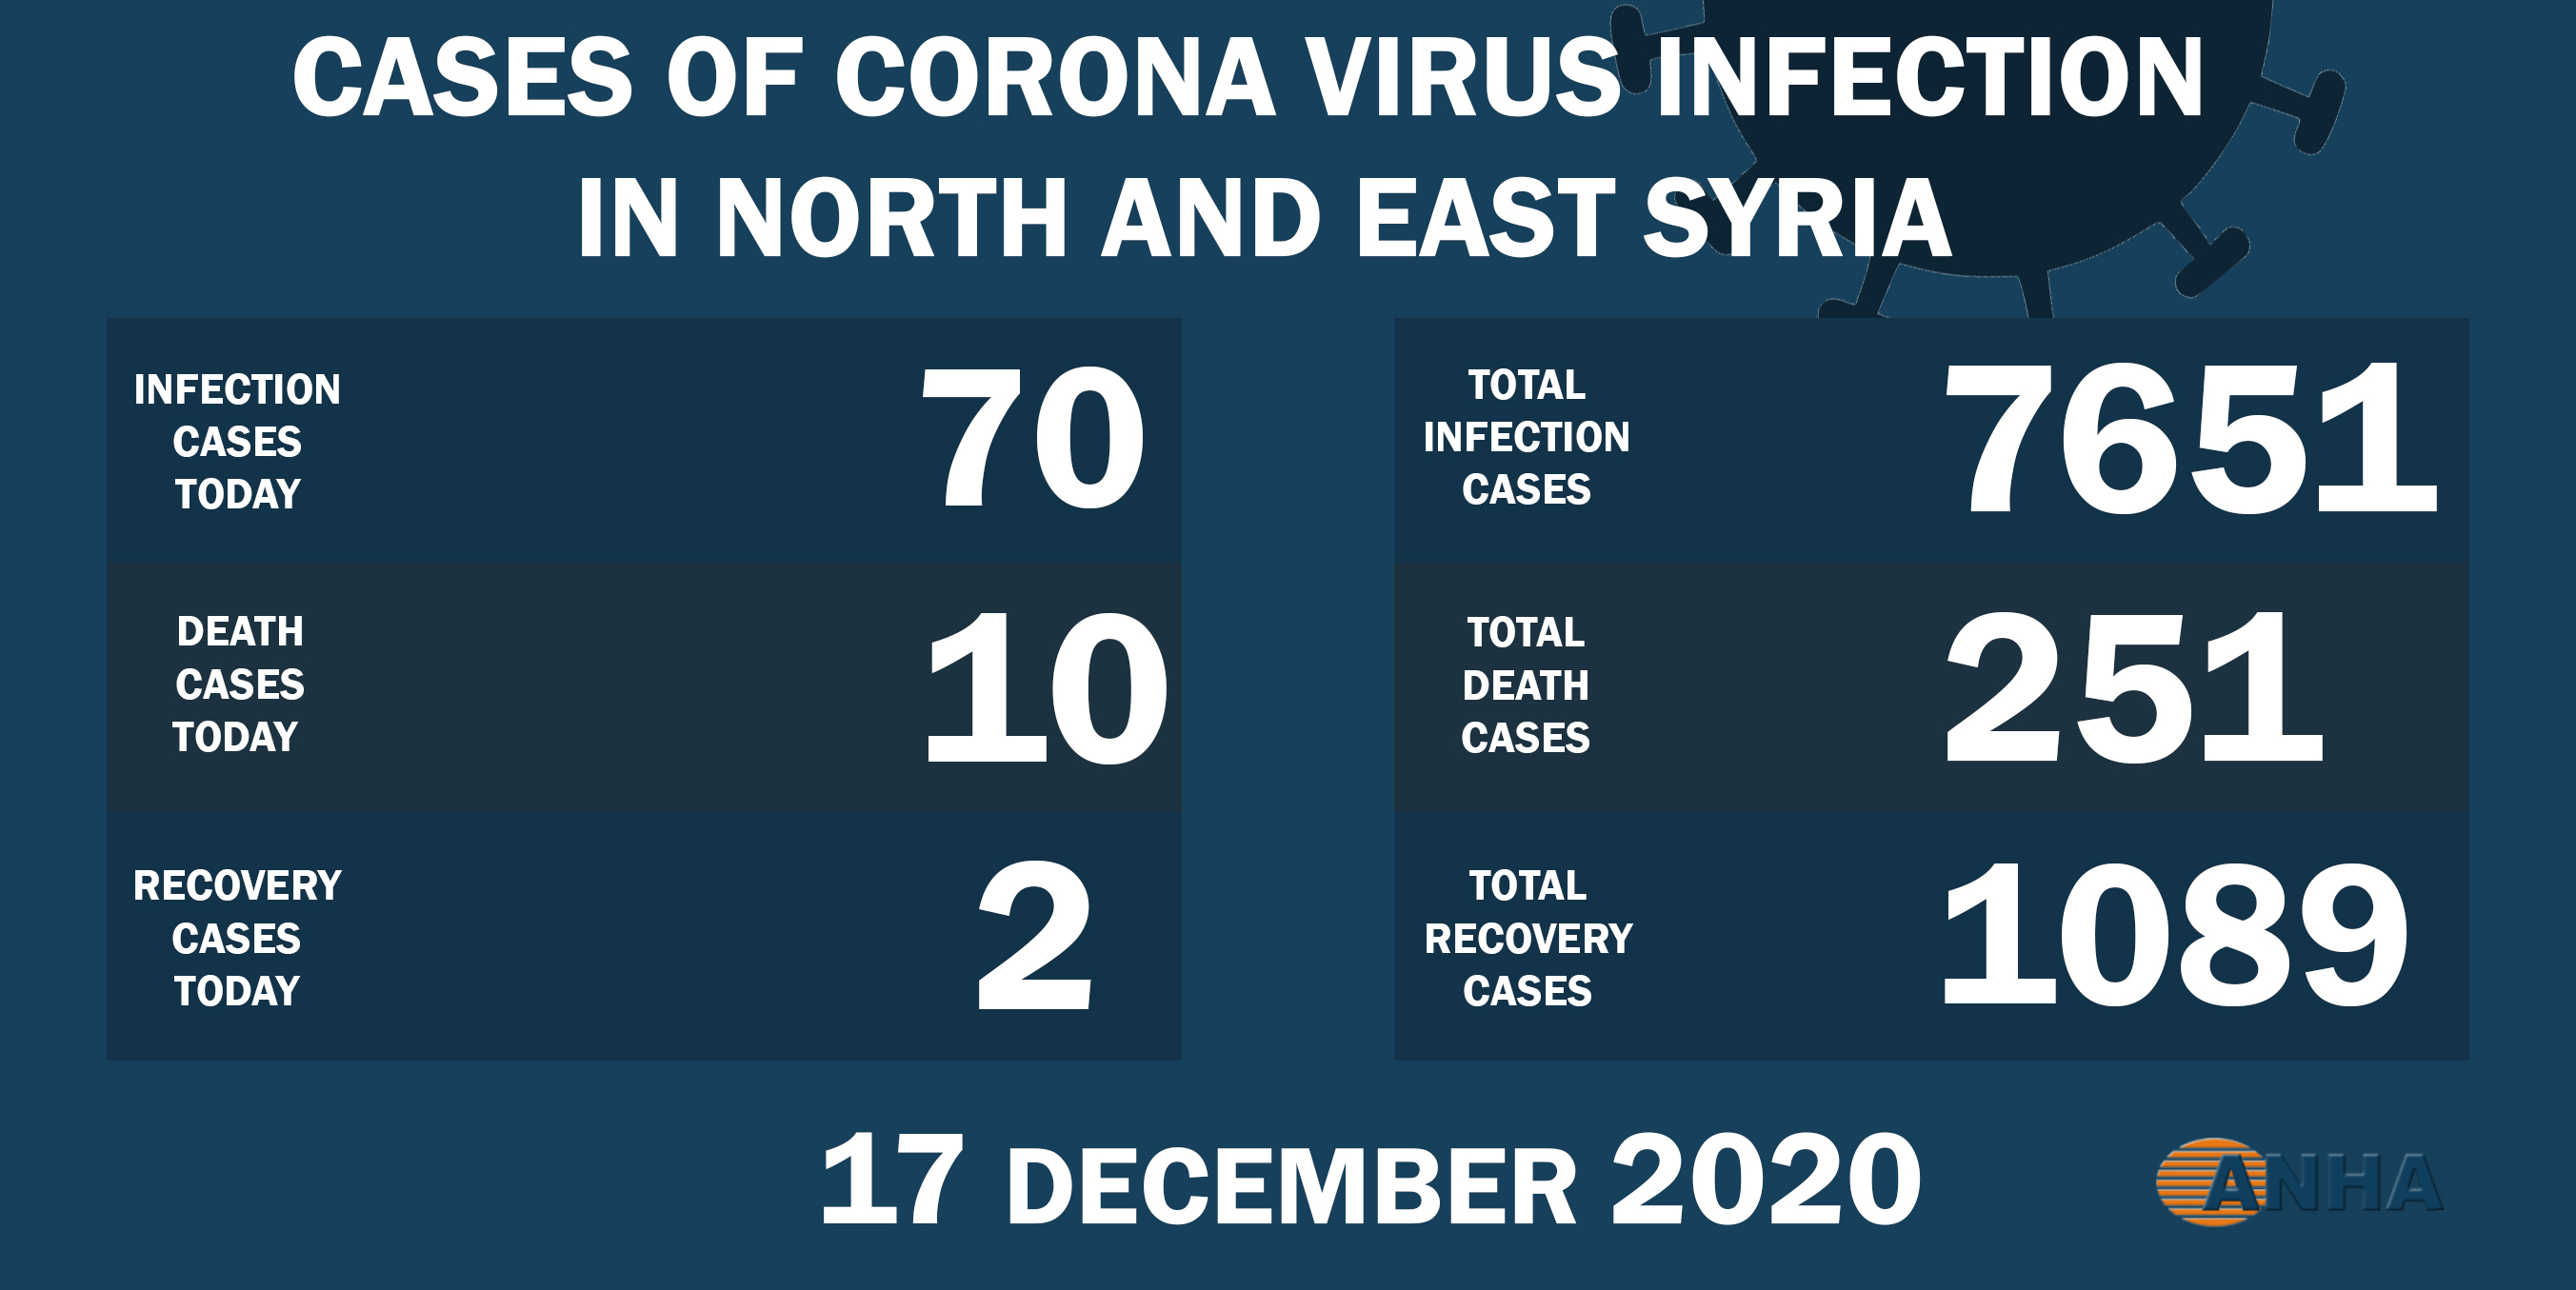 10  deaths and 70 new cases by the COVID- 19 in NE Syria